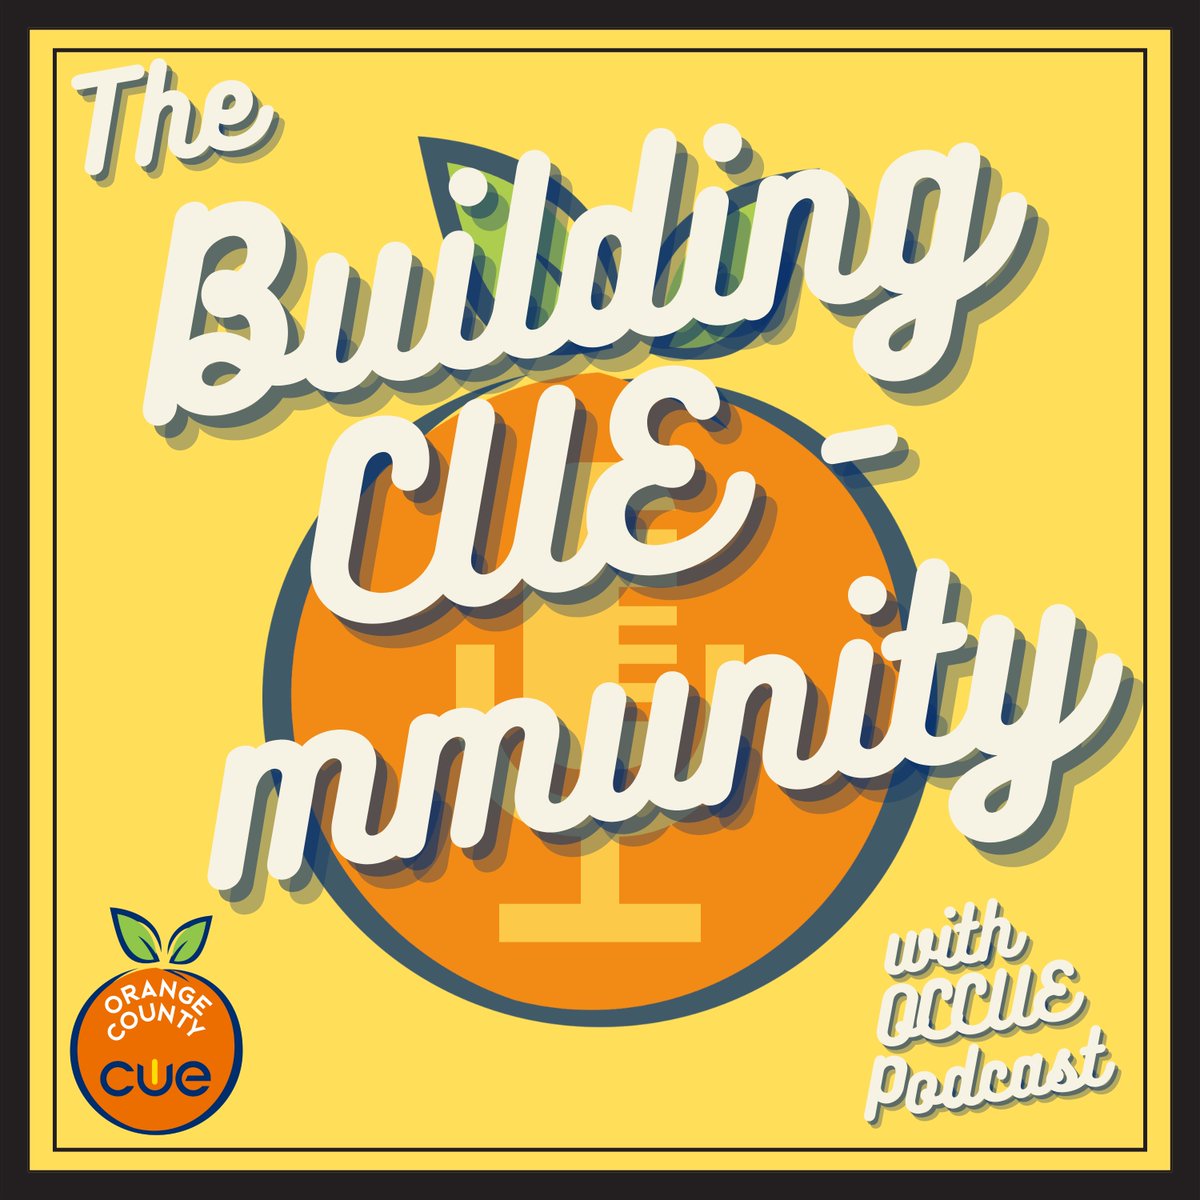 The 1st episode of 'The Building CUE-mmunity with OCCUE Podcast' just dropped! Each month we will bring you the latest in educational technology news, as well as feature a special guest from the area. Listen and subscribe wherever you get your podcasts.😃 #OCCUE #WeAreCUE #BPSD